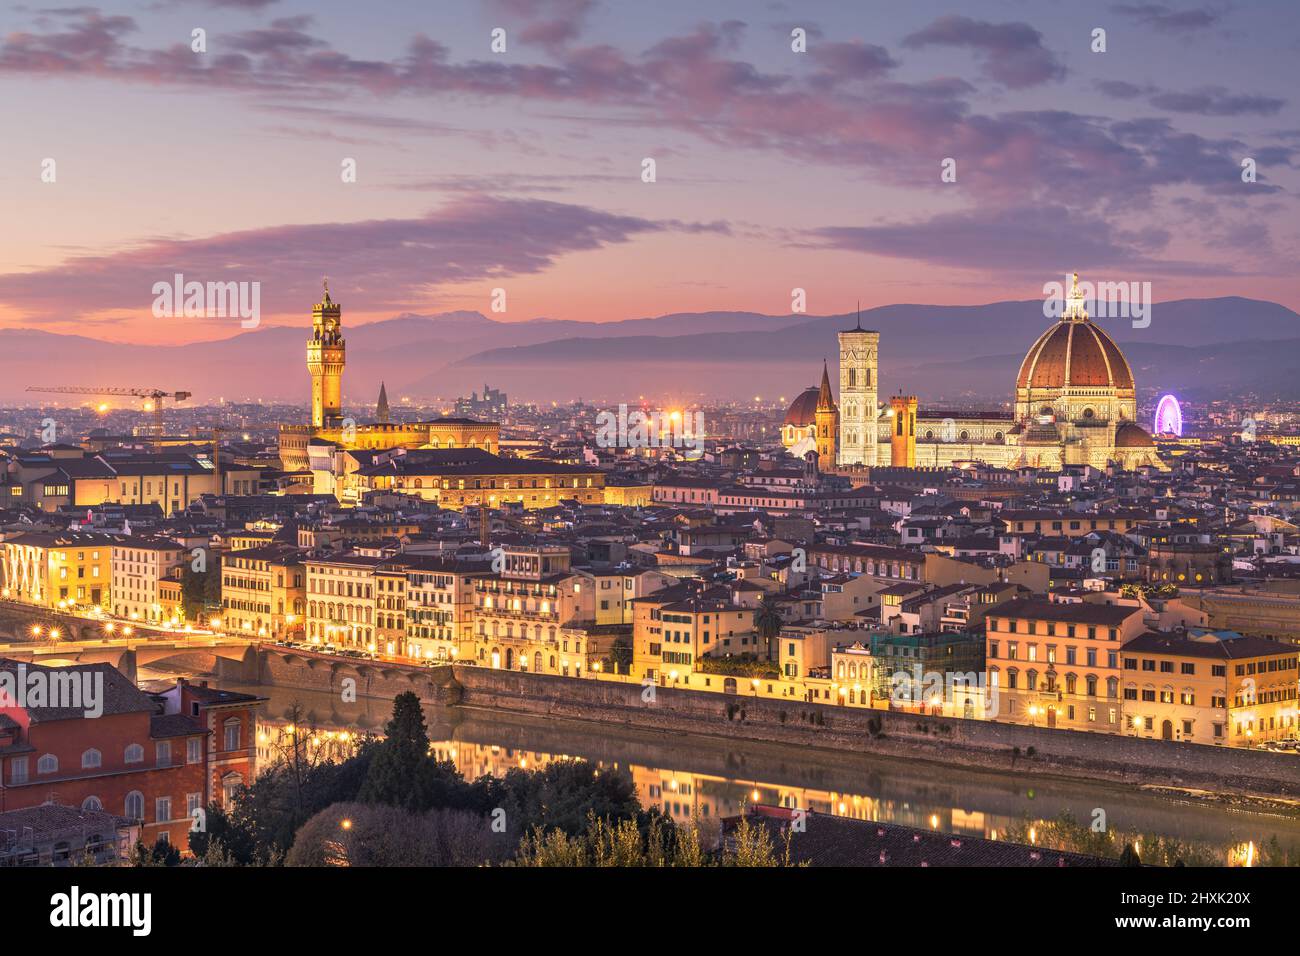 Florence, Italy skyline with landmark buildings at dusk over the Arno River. Stock Photo